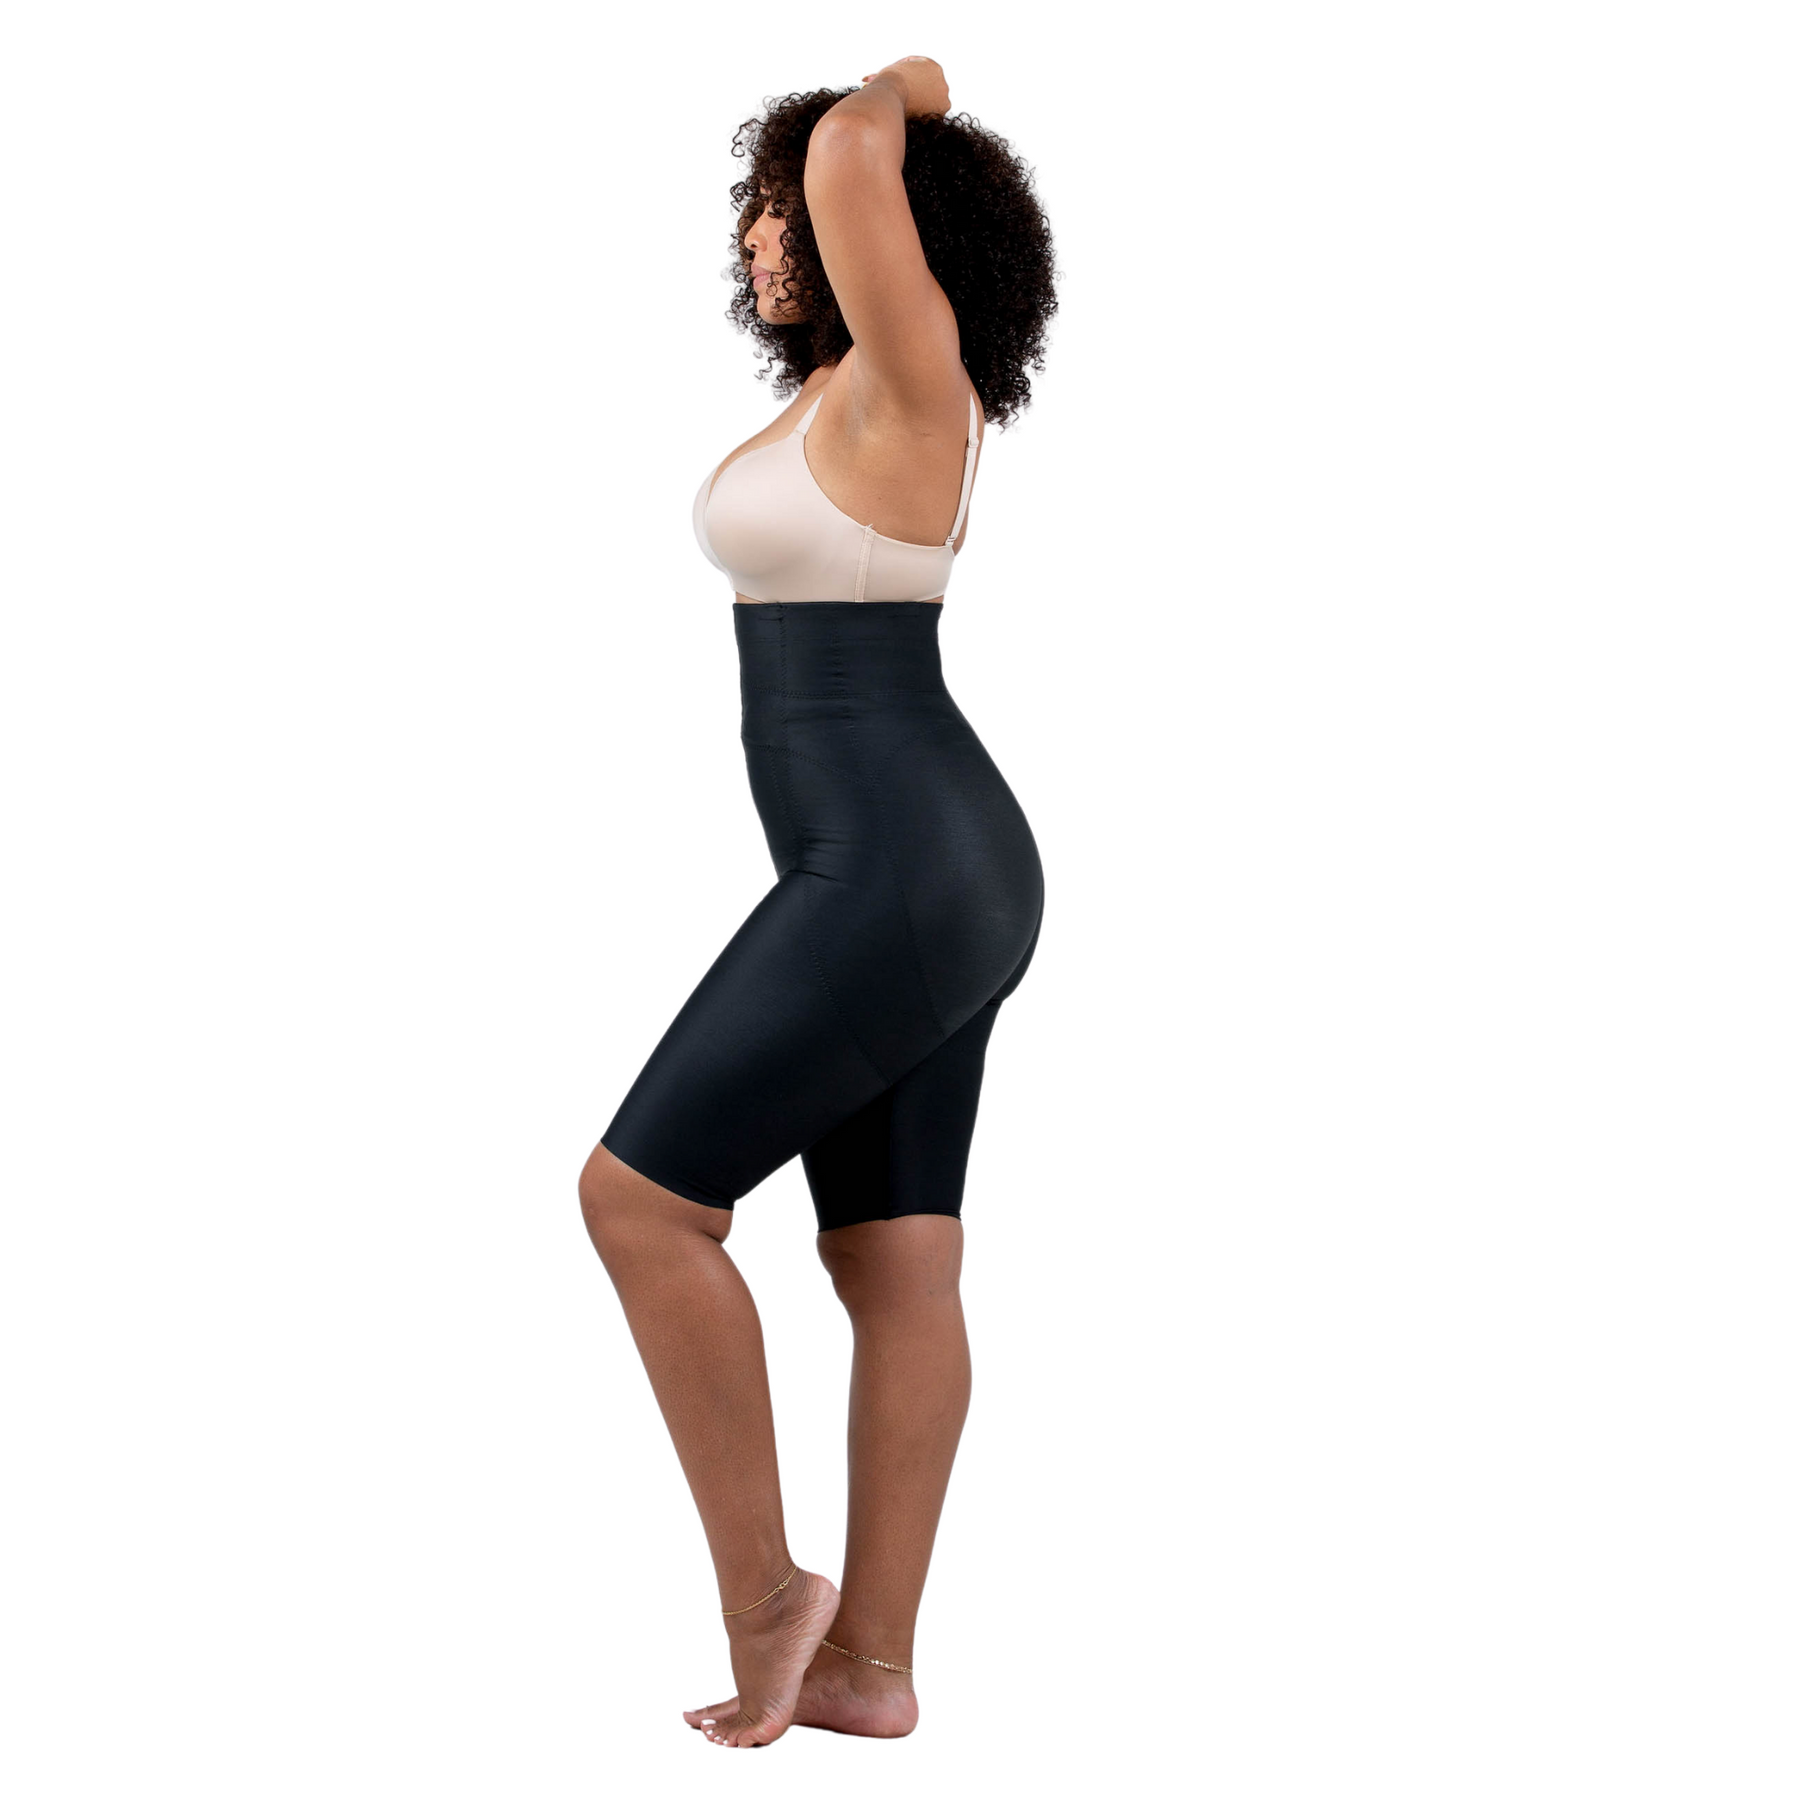 Shaped By An Angel  Best in Quality Shapers and Body Care